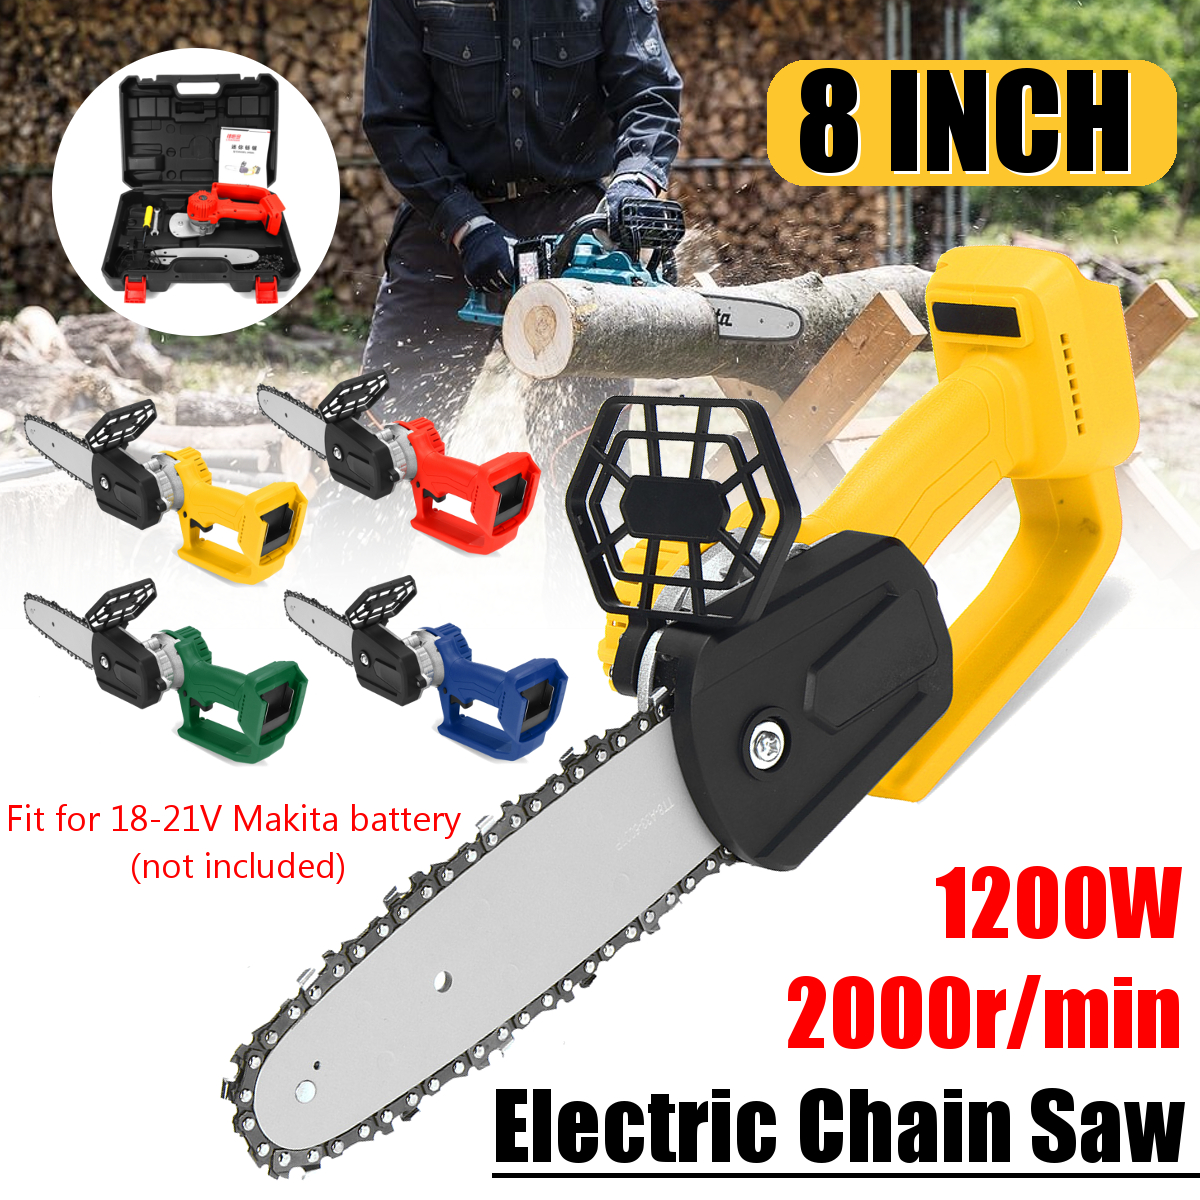 1200W-Electric-Cordless-Chainsaw-Chain-Saw-Multi-function-Wood-Cutting-Tool-For-Makita-18-21V-Batter-1771569-1